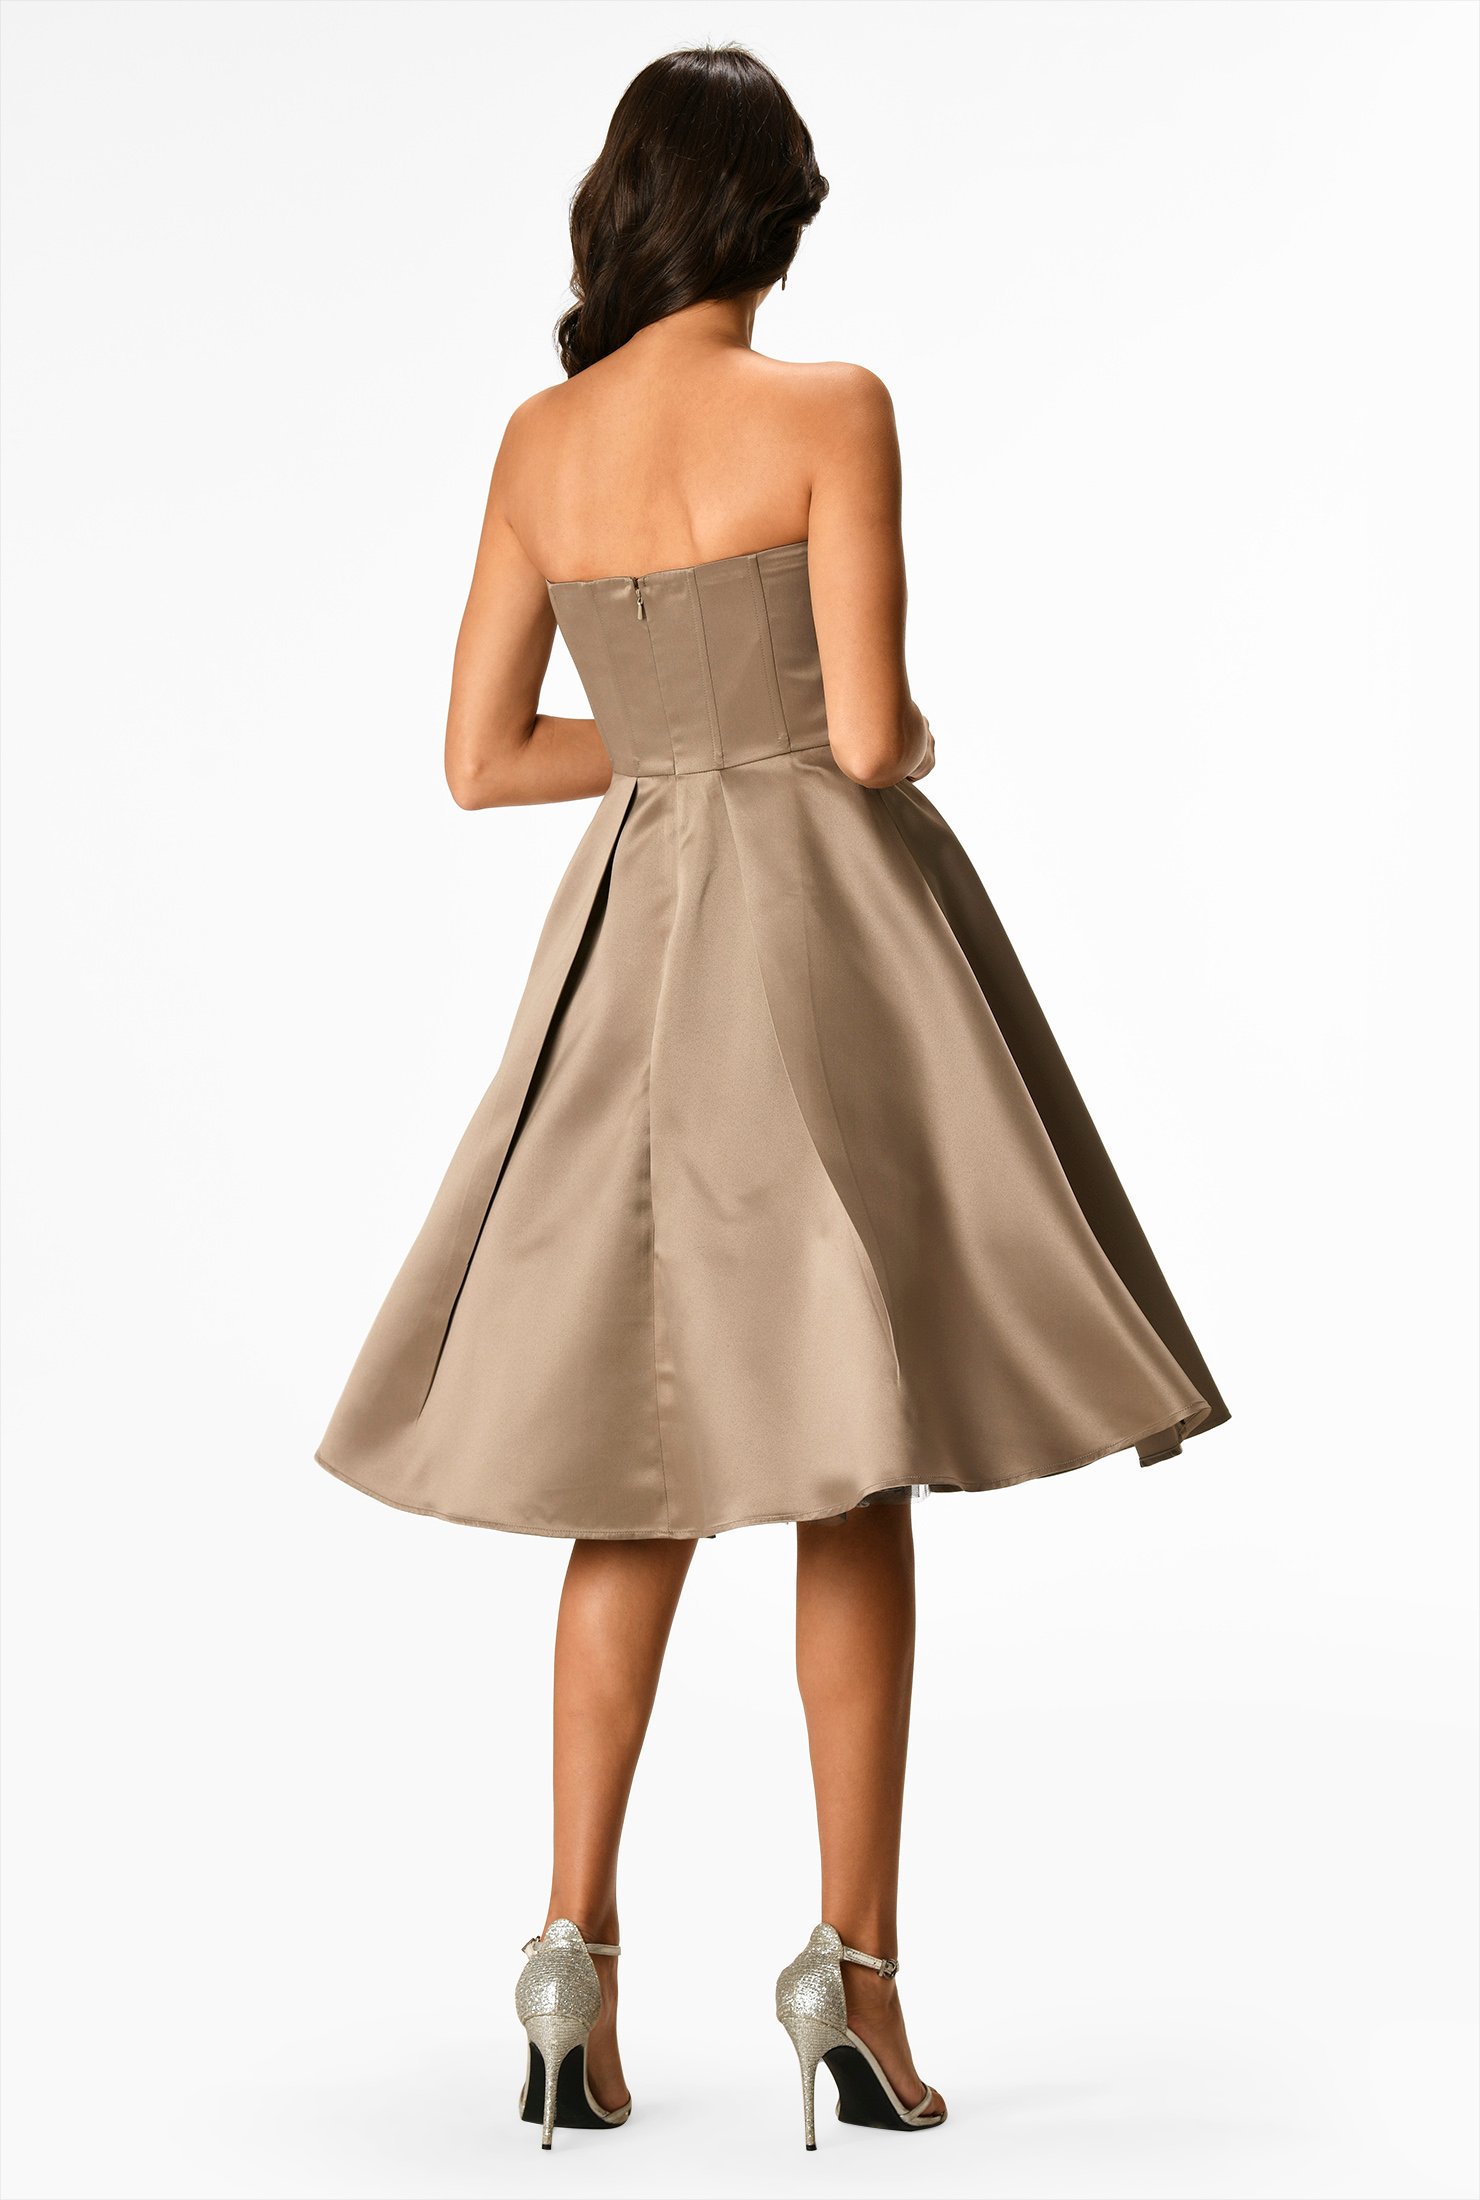 Our satin dress is styled with a strapless bodice and flared out to a full skirt with asymmetric angled pleats.